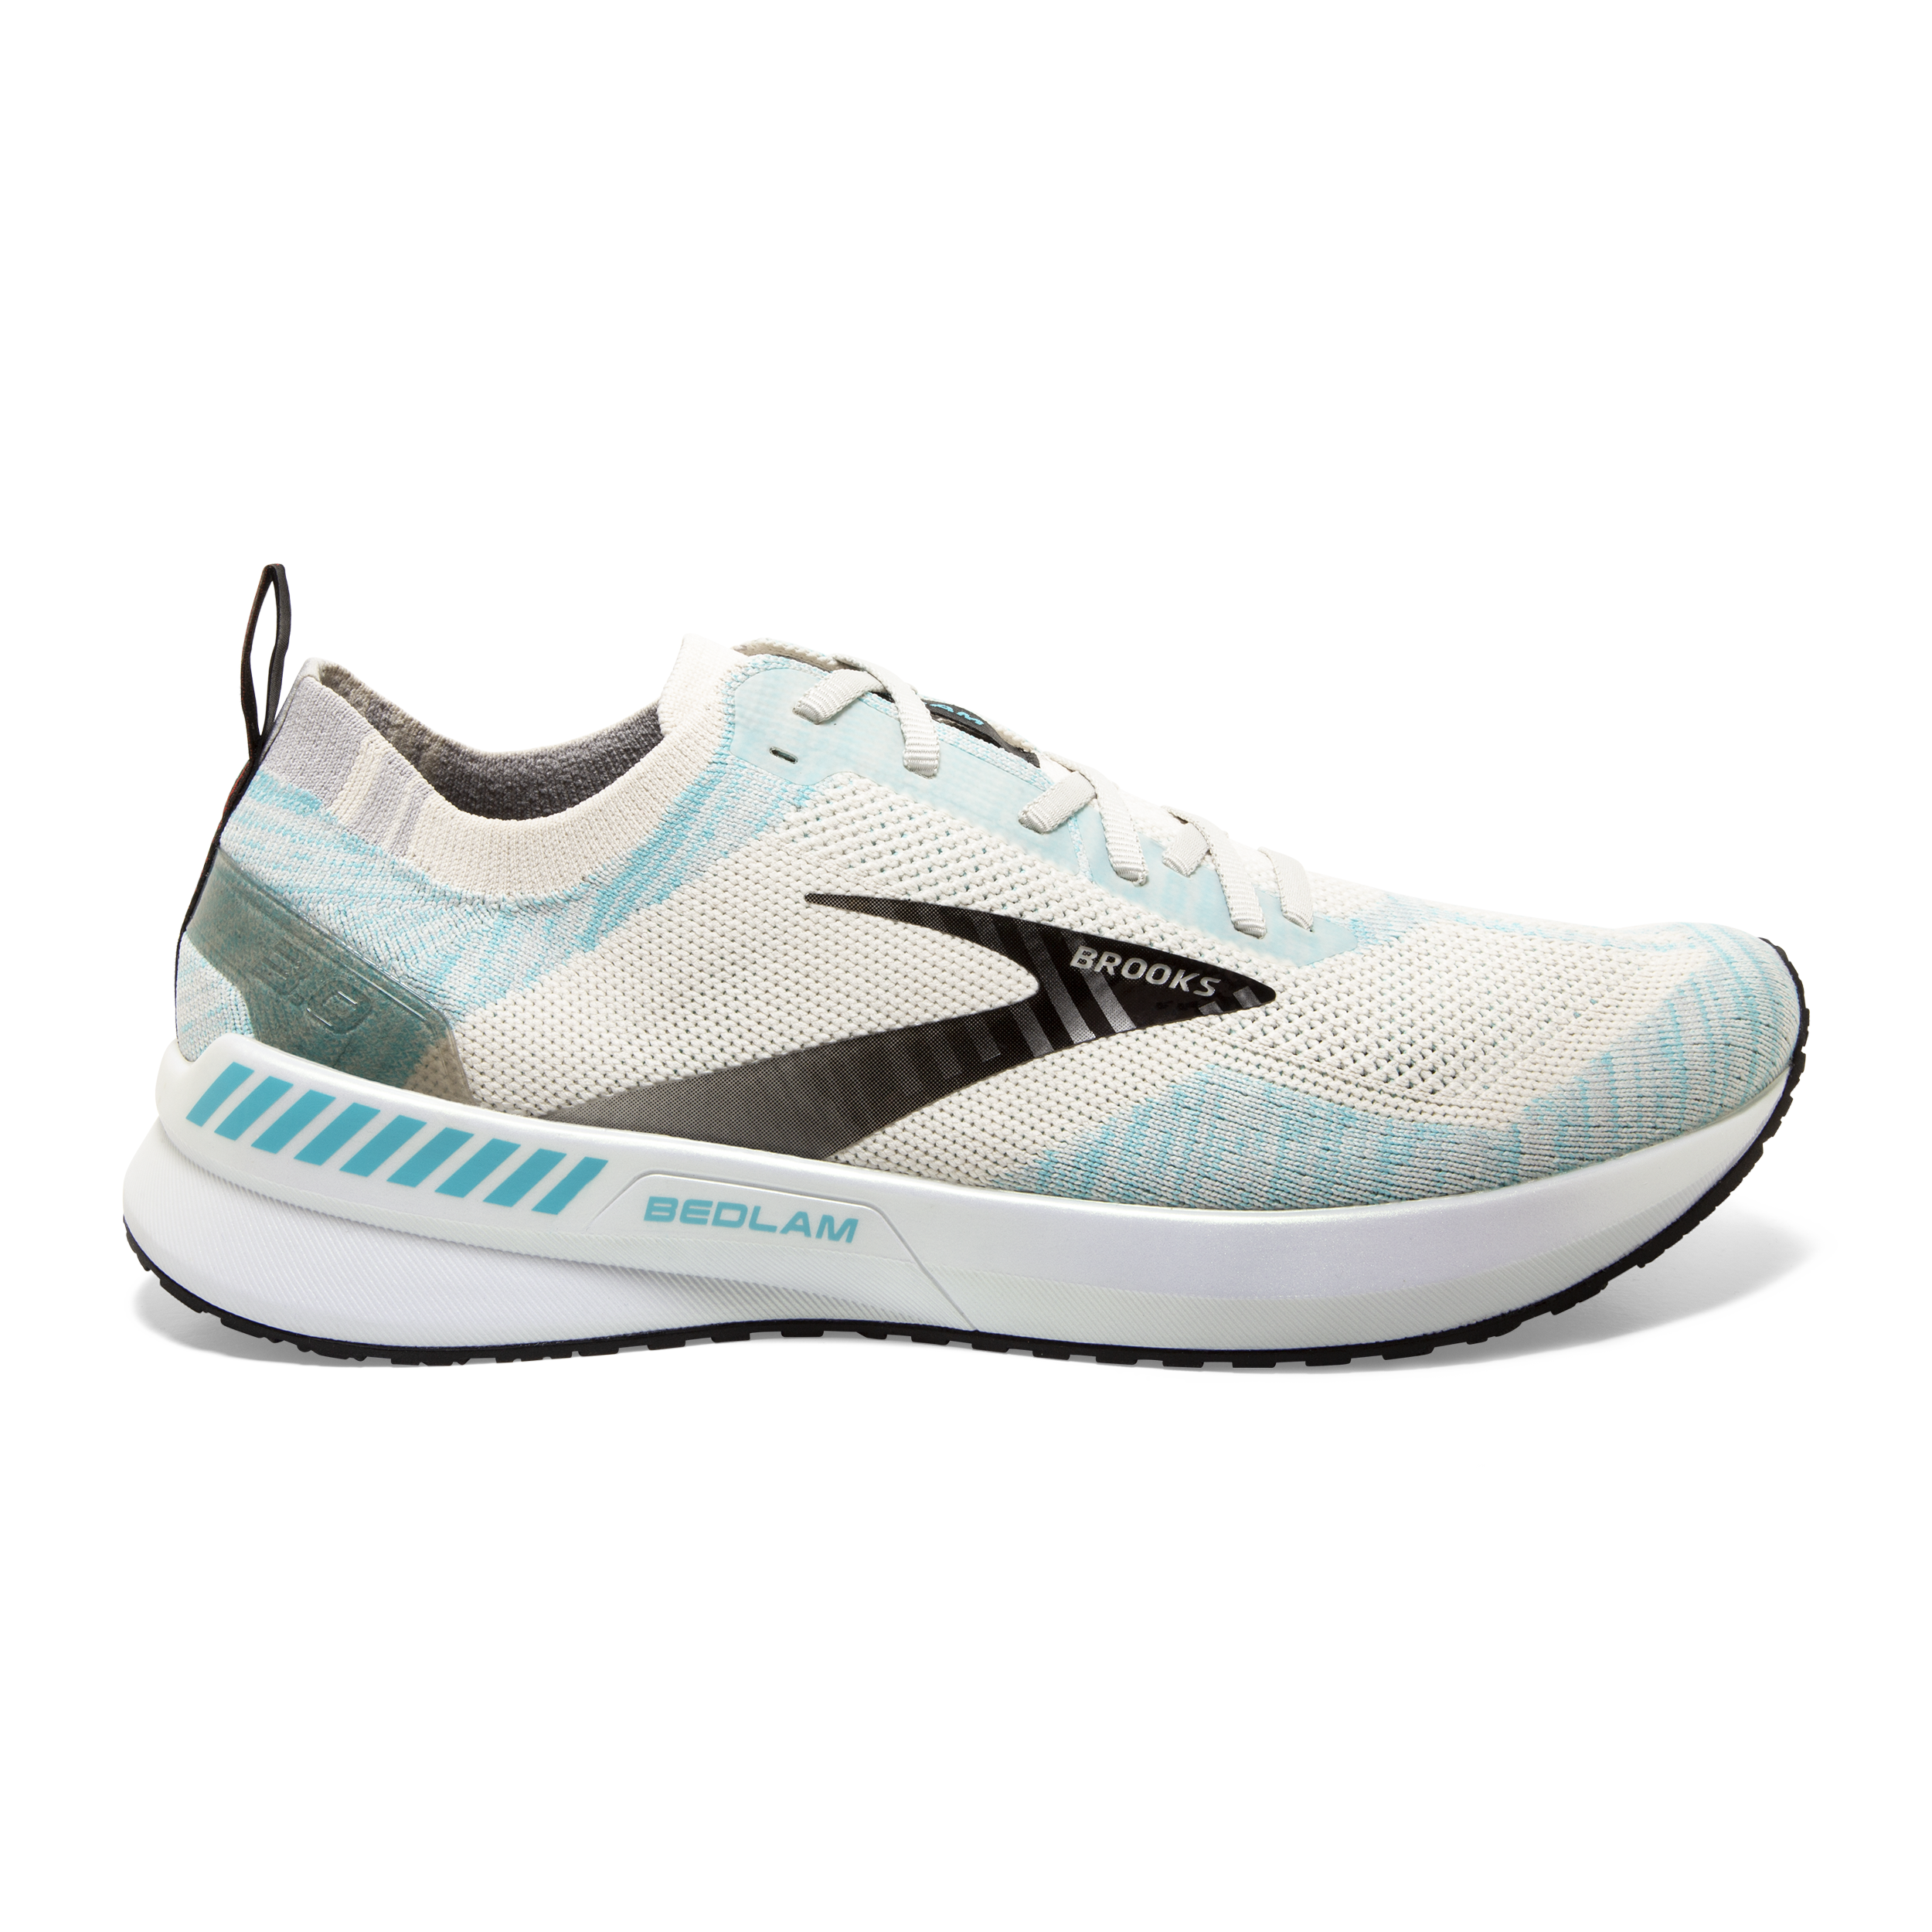 Running Shoes on Sale | Brooks Running